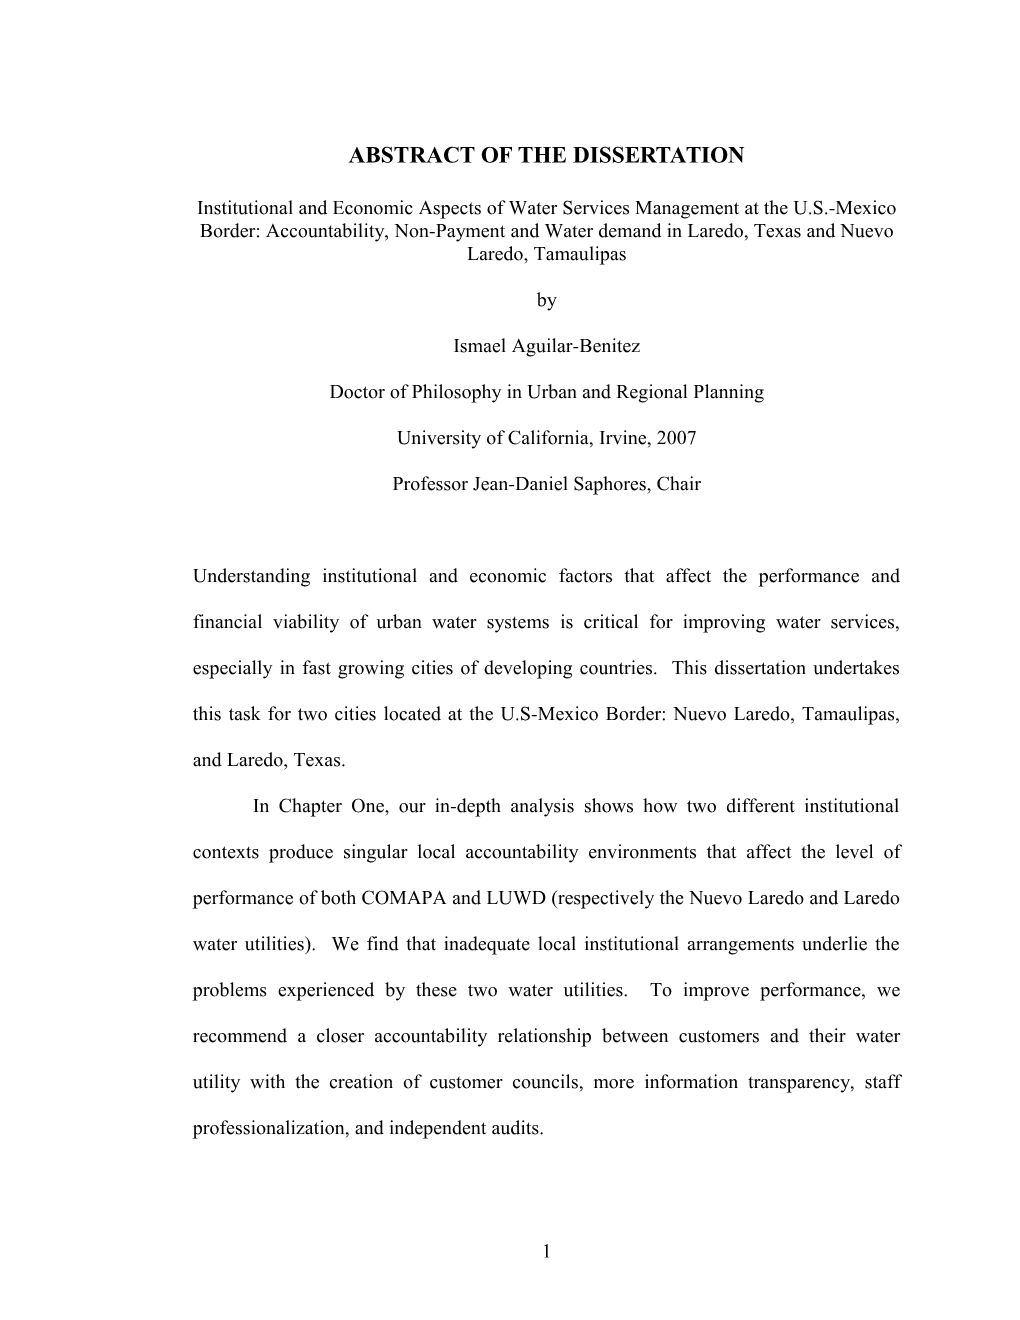 Abstract of the Dissertation s2